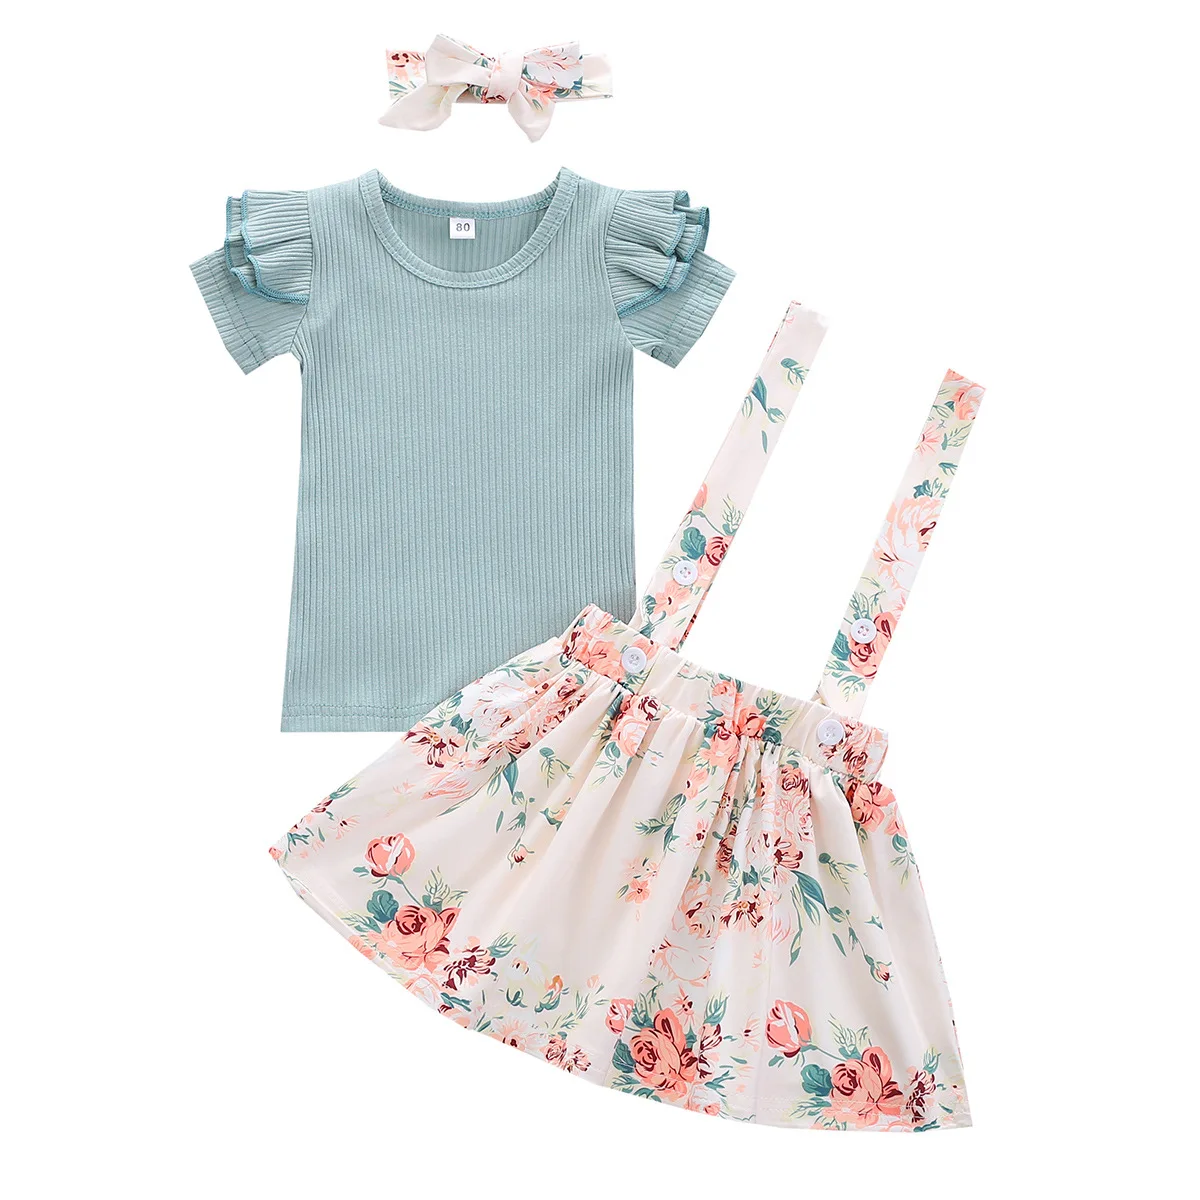 

Hot Selling Girls Summer Cute Clothing Set Sky Blue Little Girls Clothing Sets Shirt and Dress Set for Girls 1-5Y